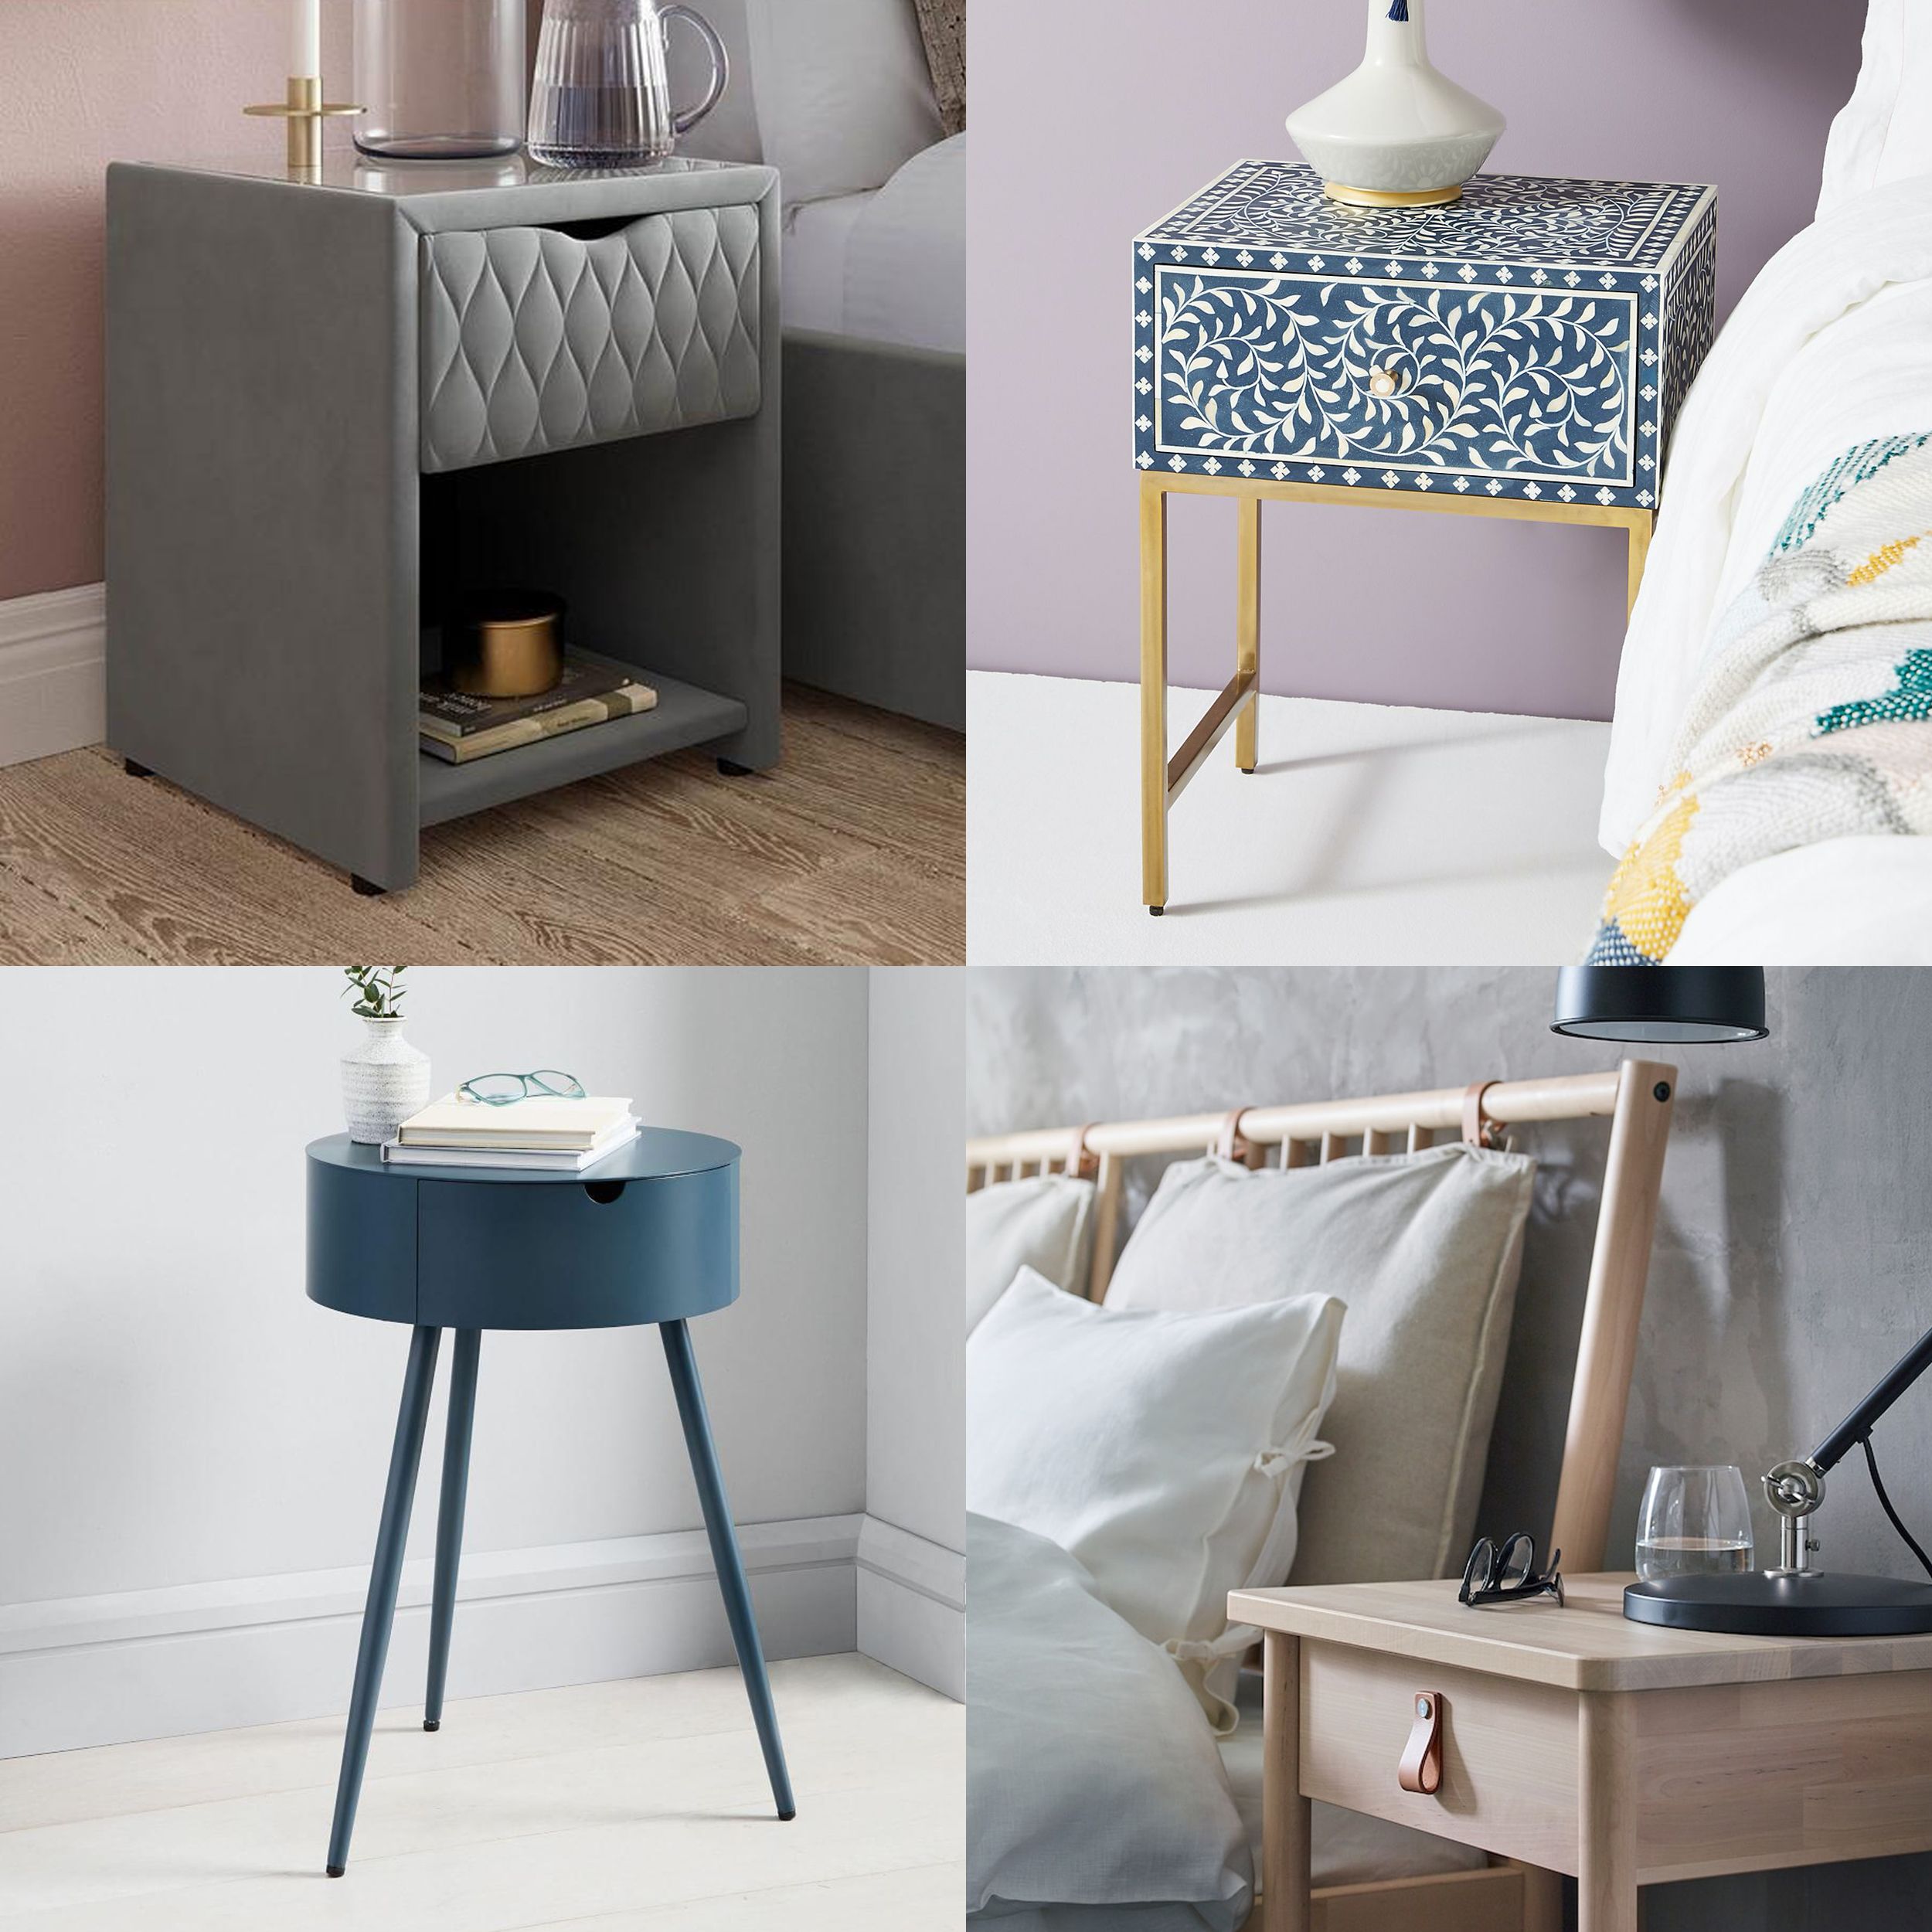 21 Small Bedside Tables To Save Space, Small Storage Table With Drawers